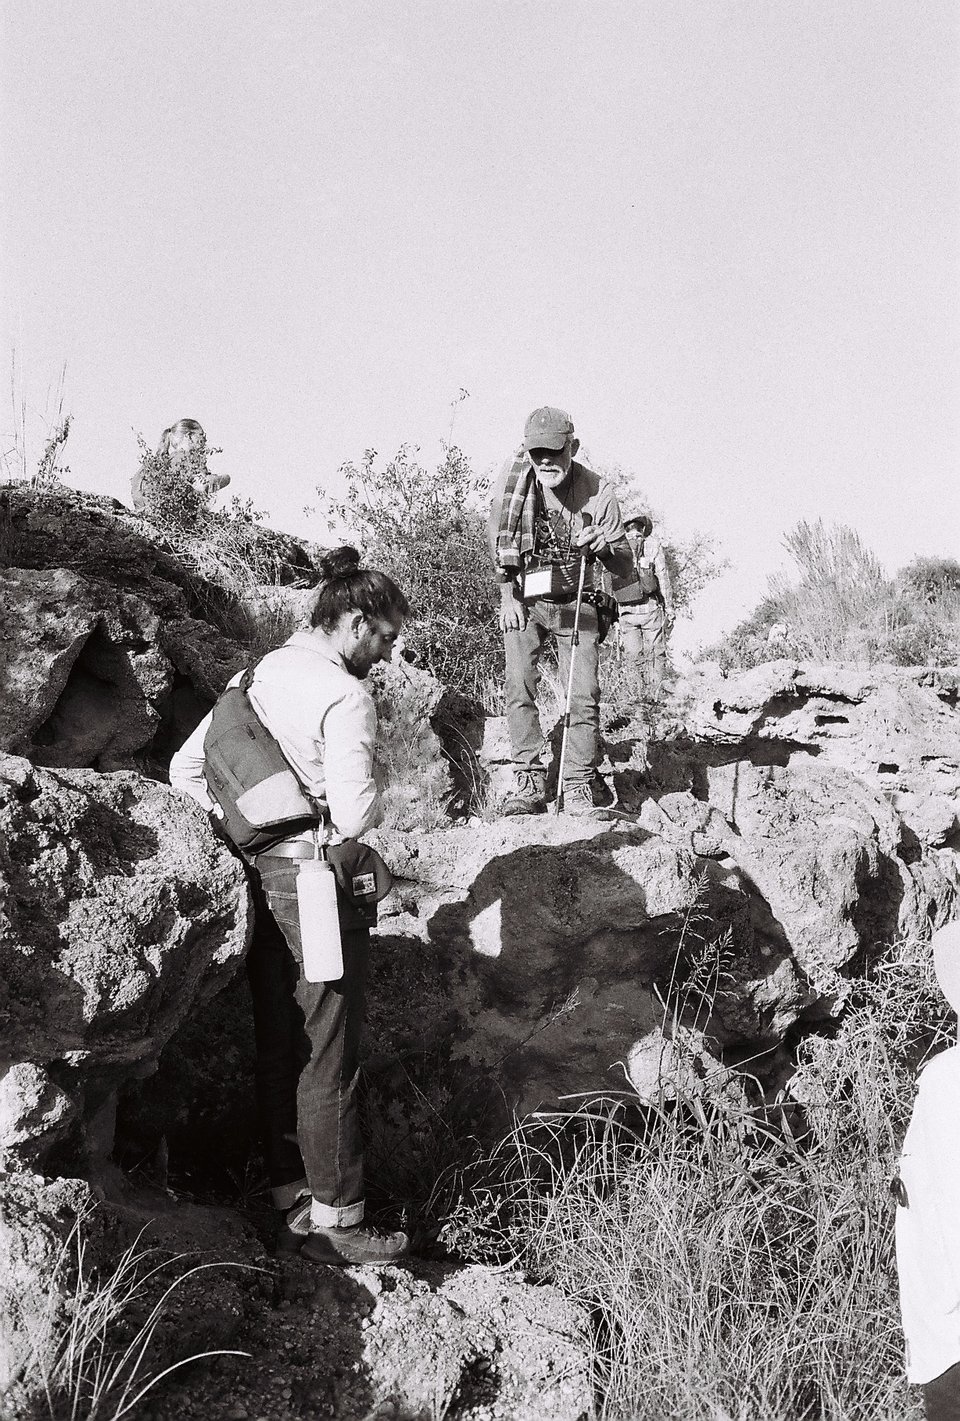 Photograph of two people looking at a rock outcrop.